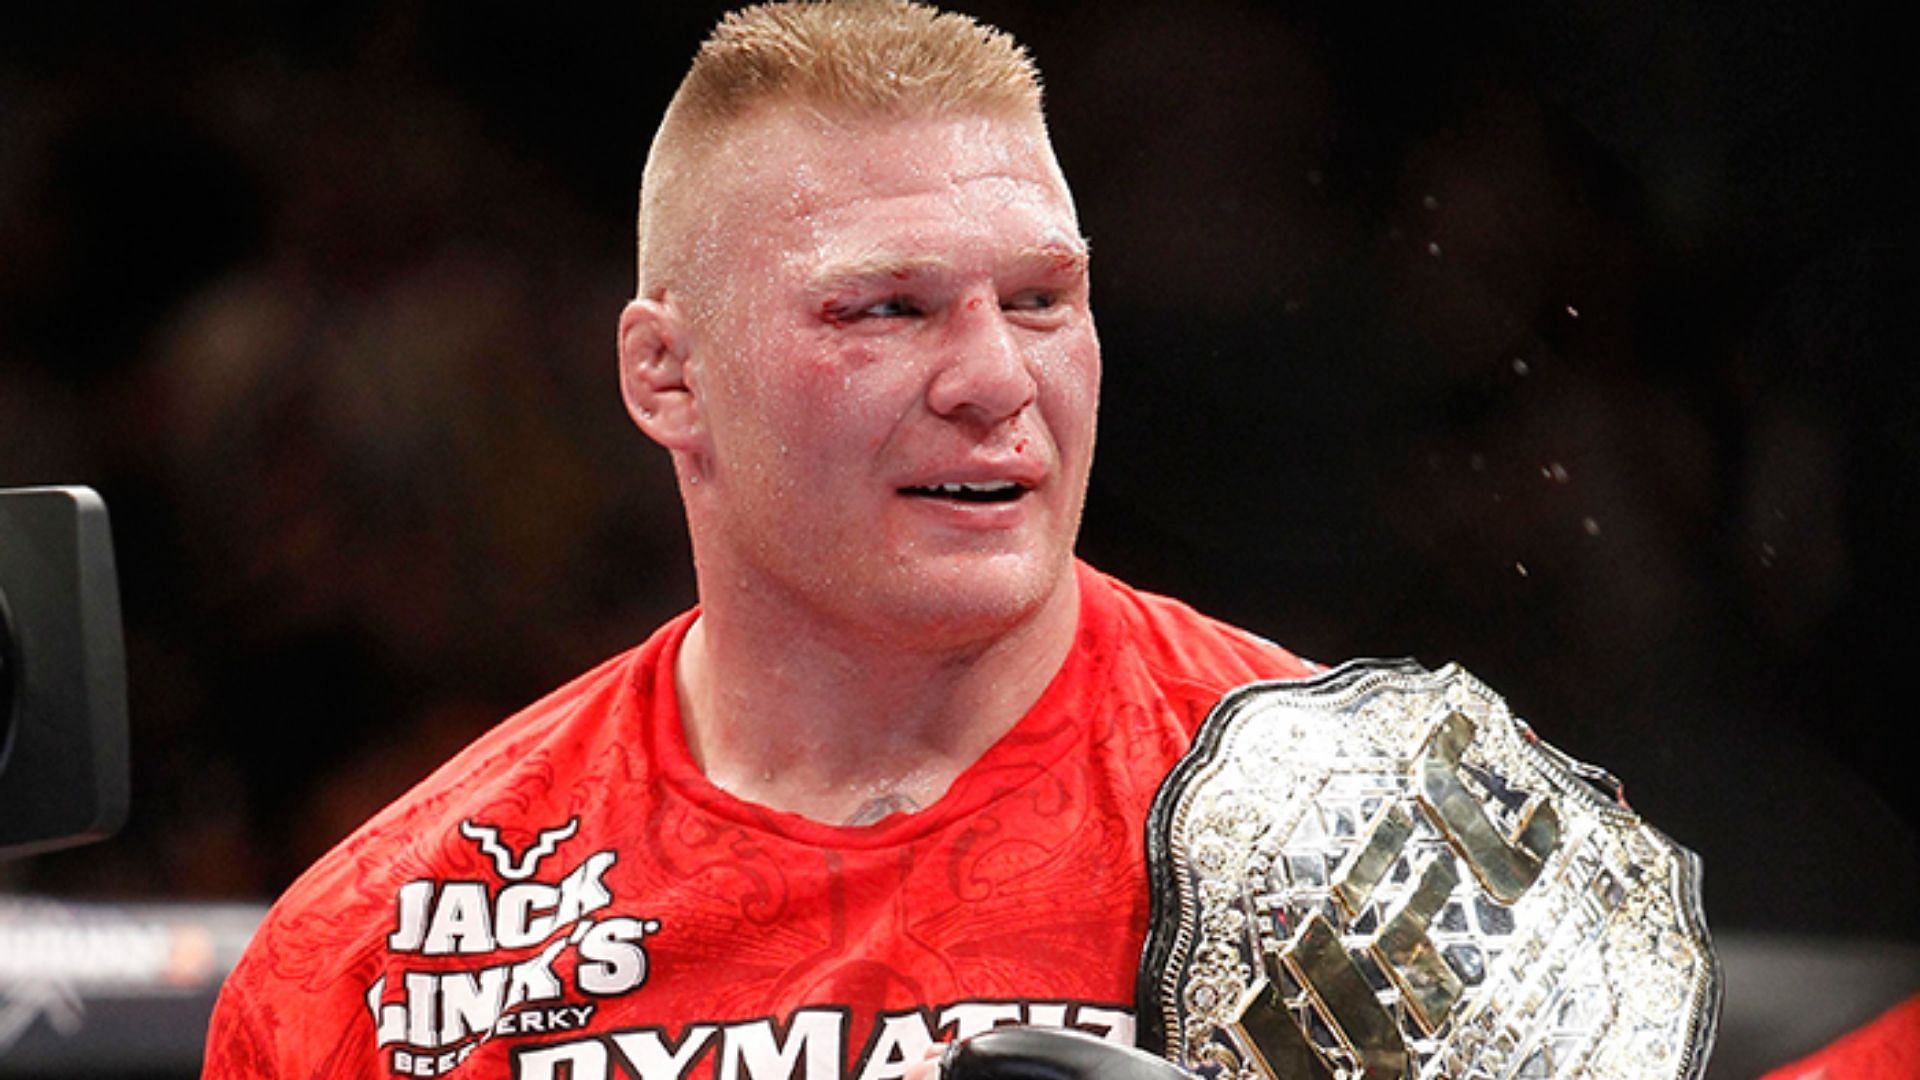 Brock Lesnar went from being the most successful wrestler to an MMA legend